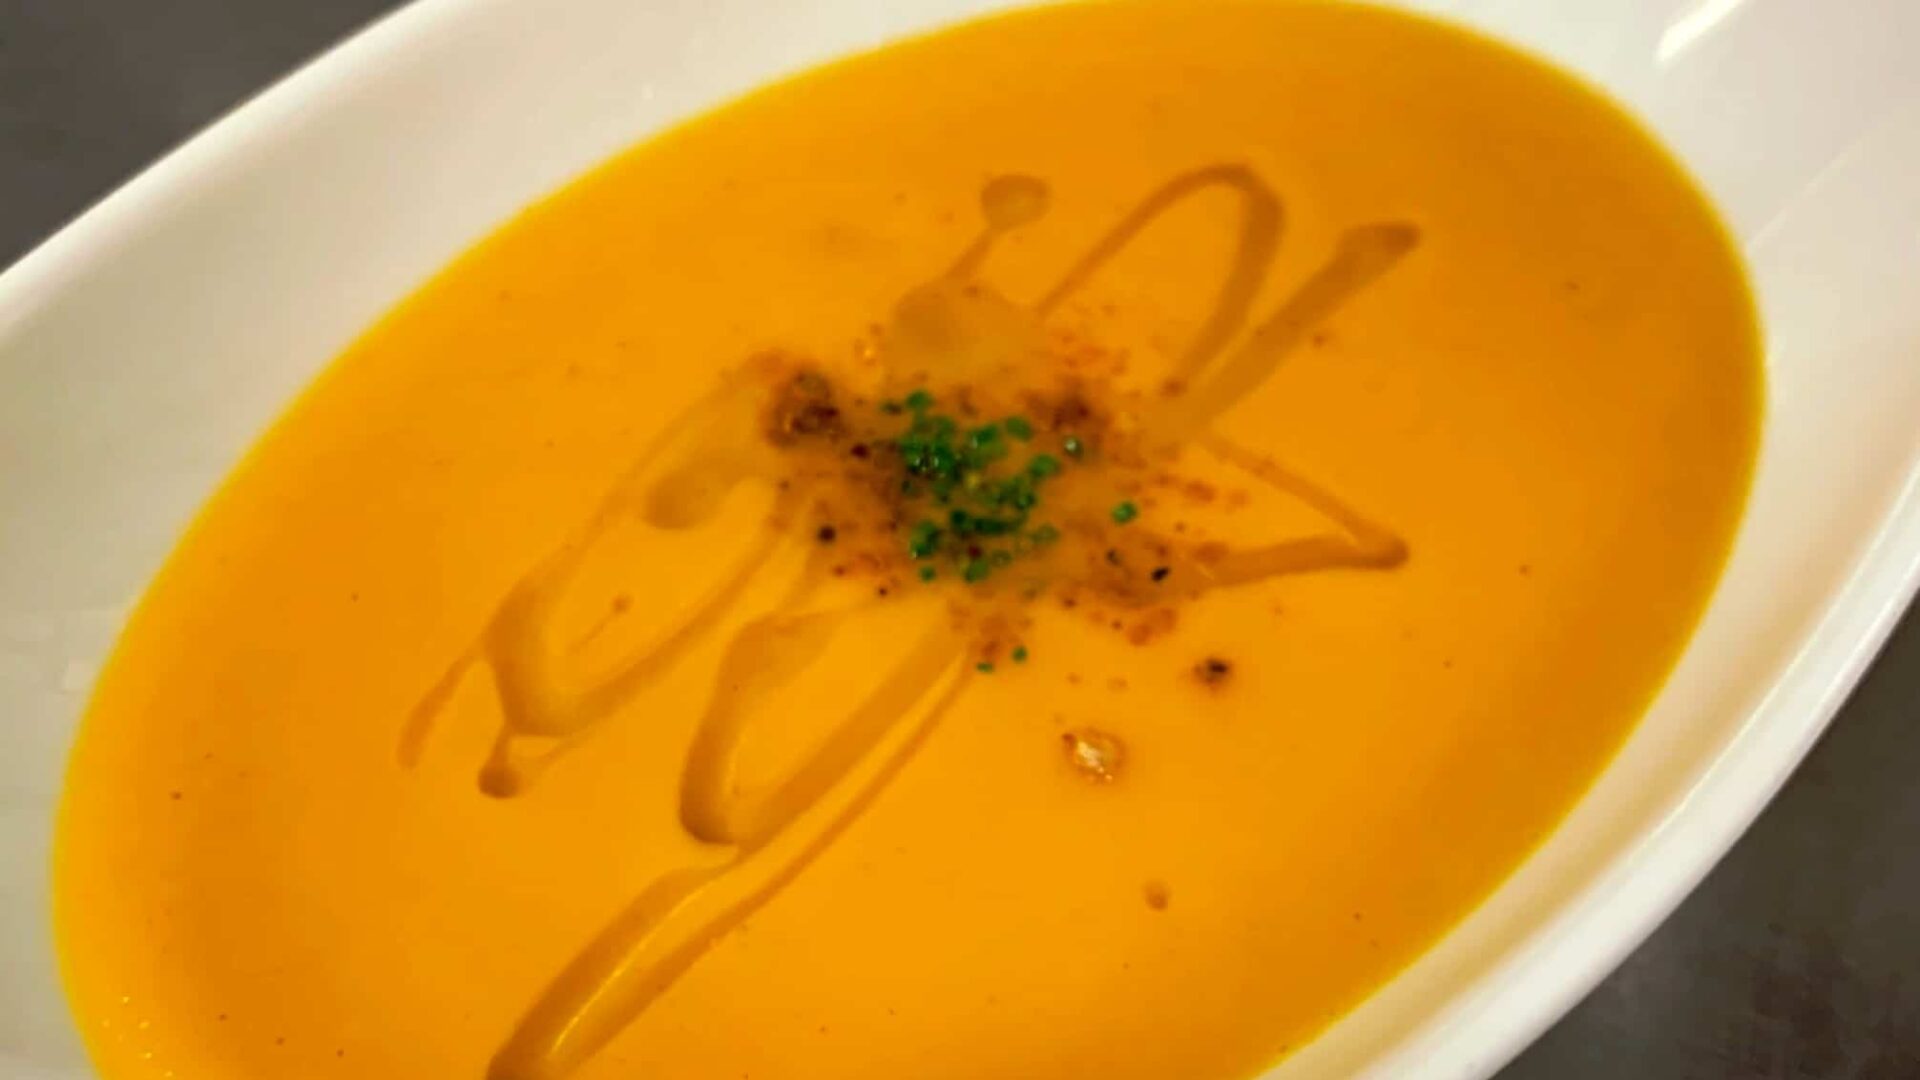 An oval white bowl filled with sweet potato soup|A bowl of sweet potato coconut curry soup|Chef spooning pepper relish into a glass bowl